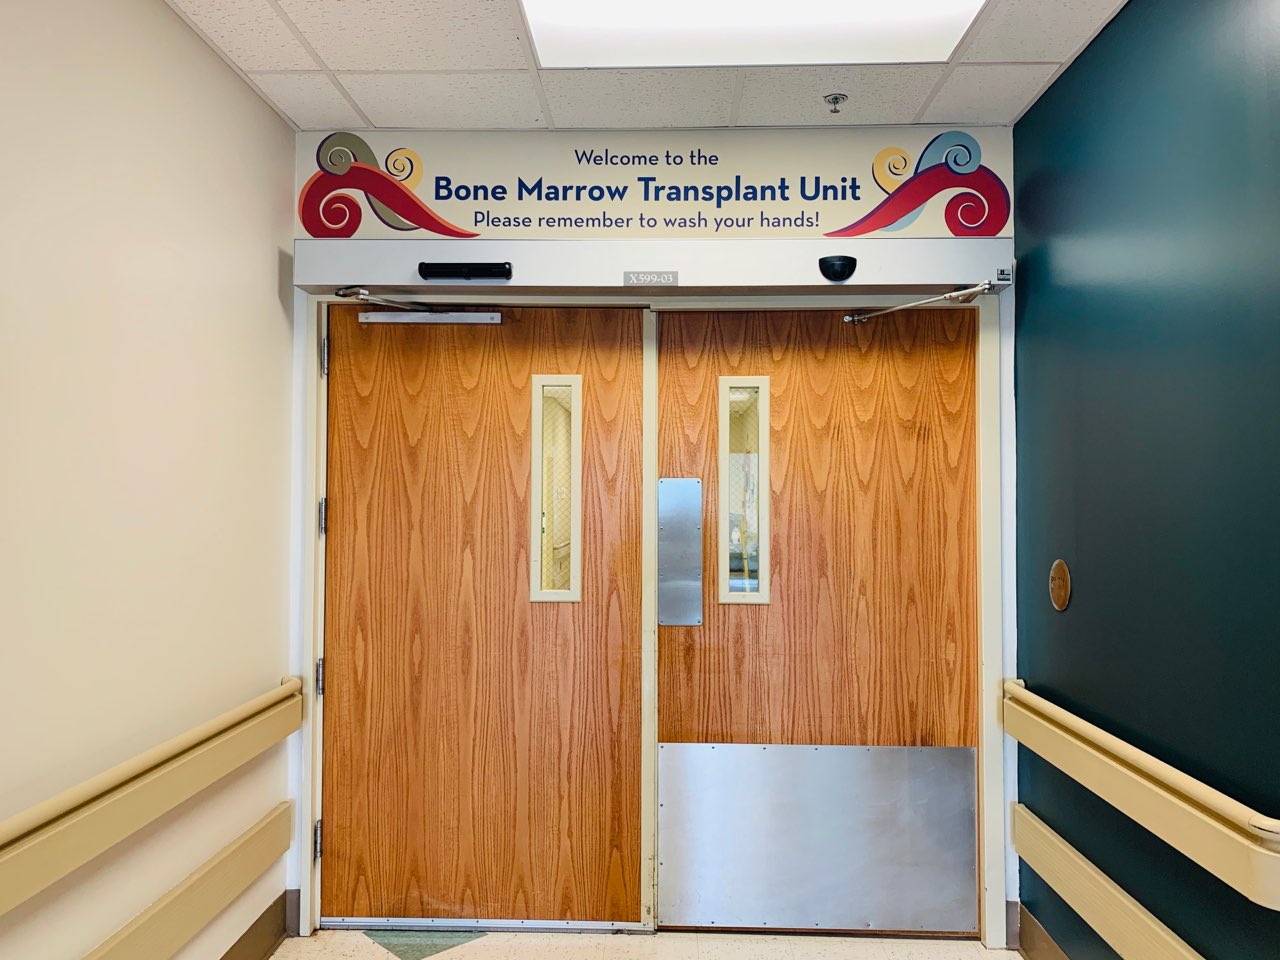 Double doors leading to the Bone Marrow Transplant Unit with a sign above that says Welcome to the Bone Marrow Transplant Unit. Please remember to wash your hands.